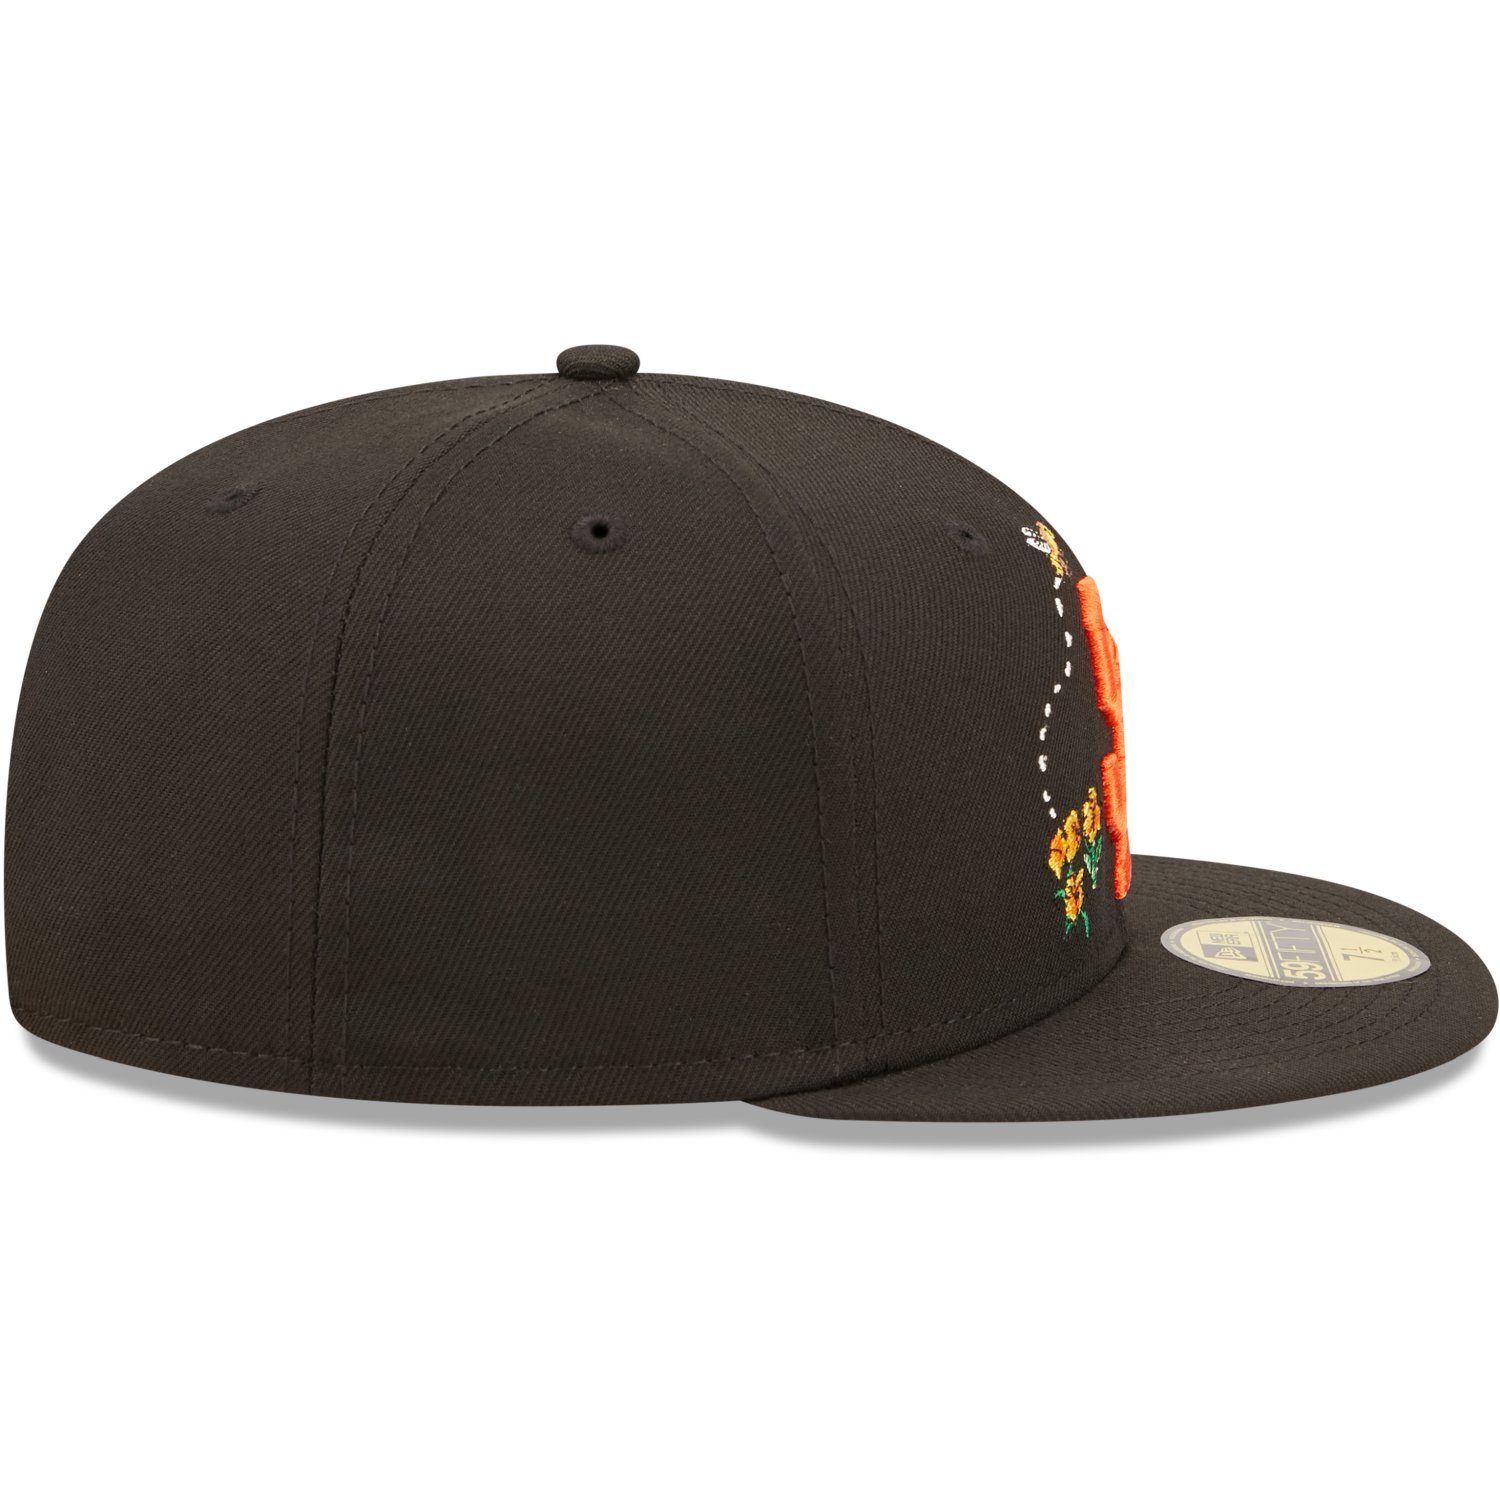 FLORAL New Giants San WATER Era Fitted Cap Francisco 59Fifty